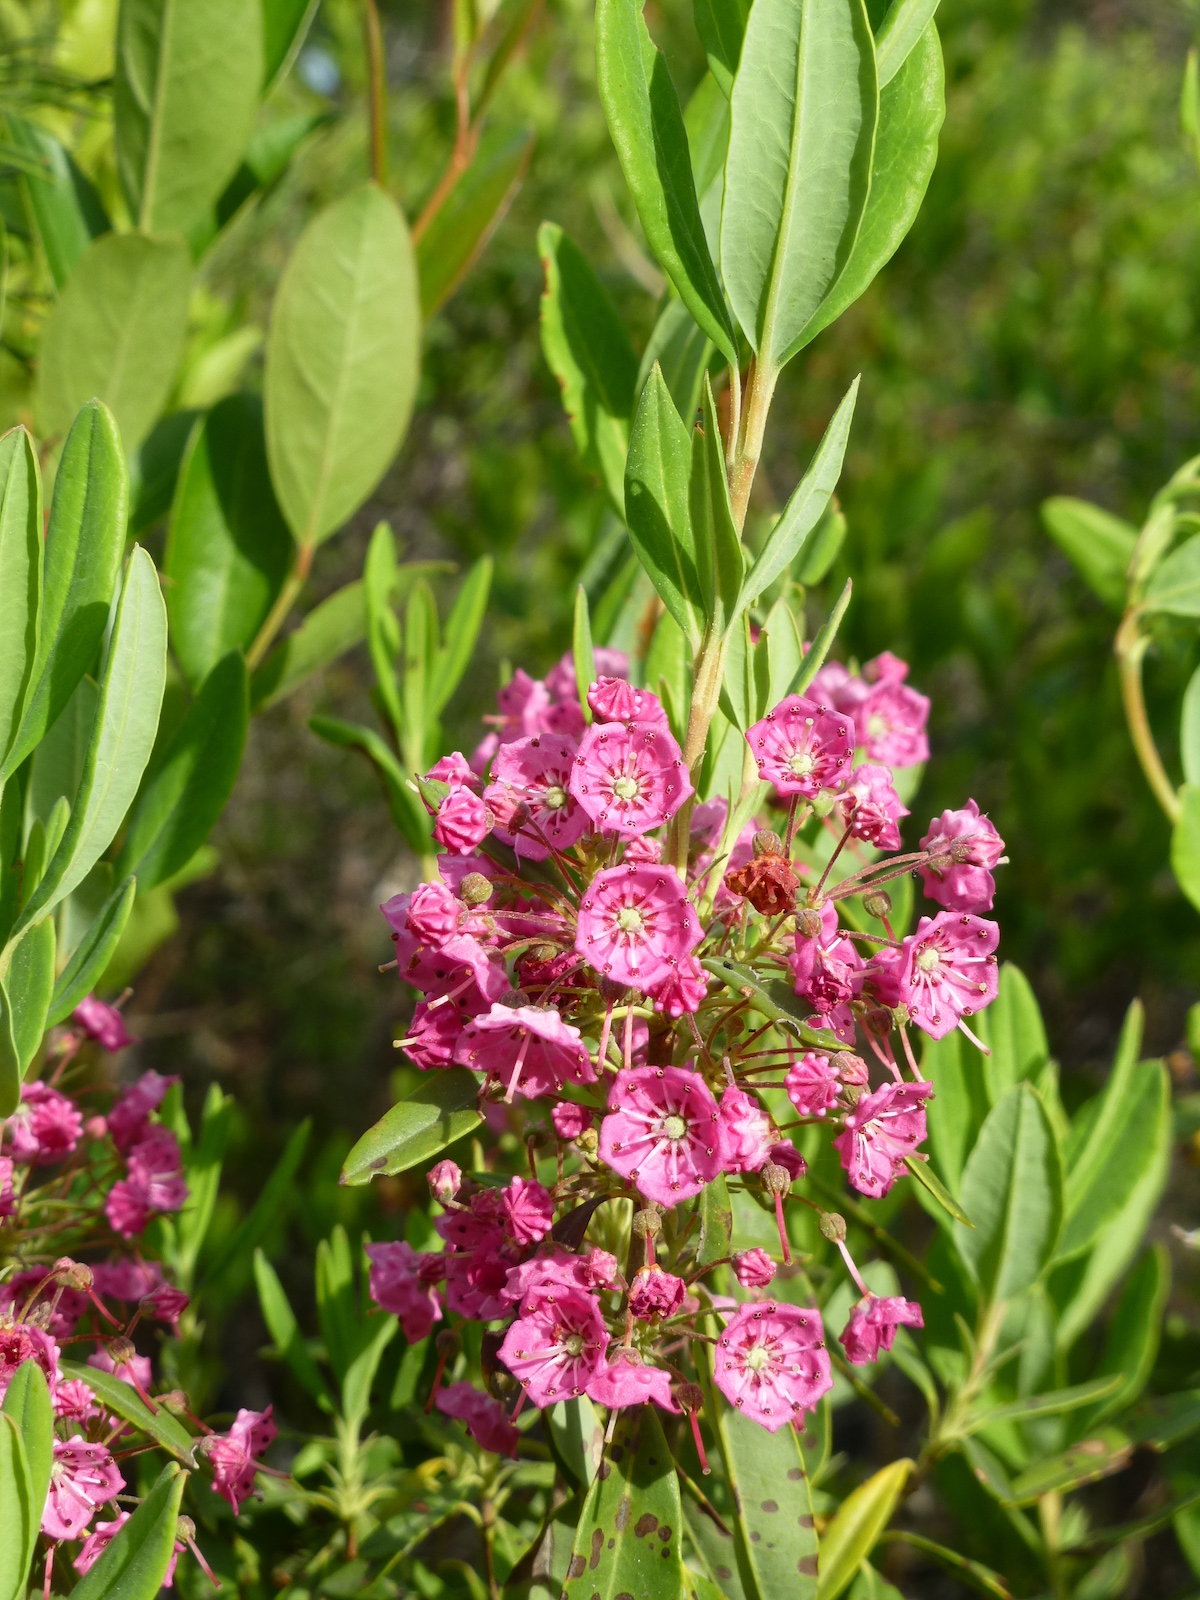 The Scientific Name is Kalmia angustifolia. You will likely hear them called Sheep Laurel, Northern Sheepkill. This picture shows the  Thick, entire, glaucous blue-green leaves and small rosy-pink flowers. of Kalmia angustifolia